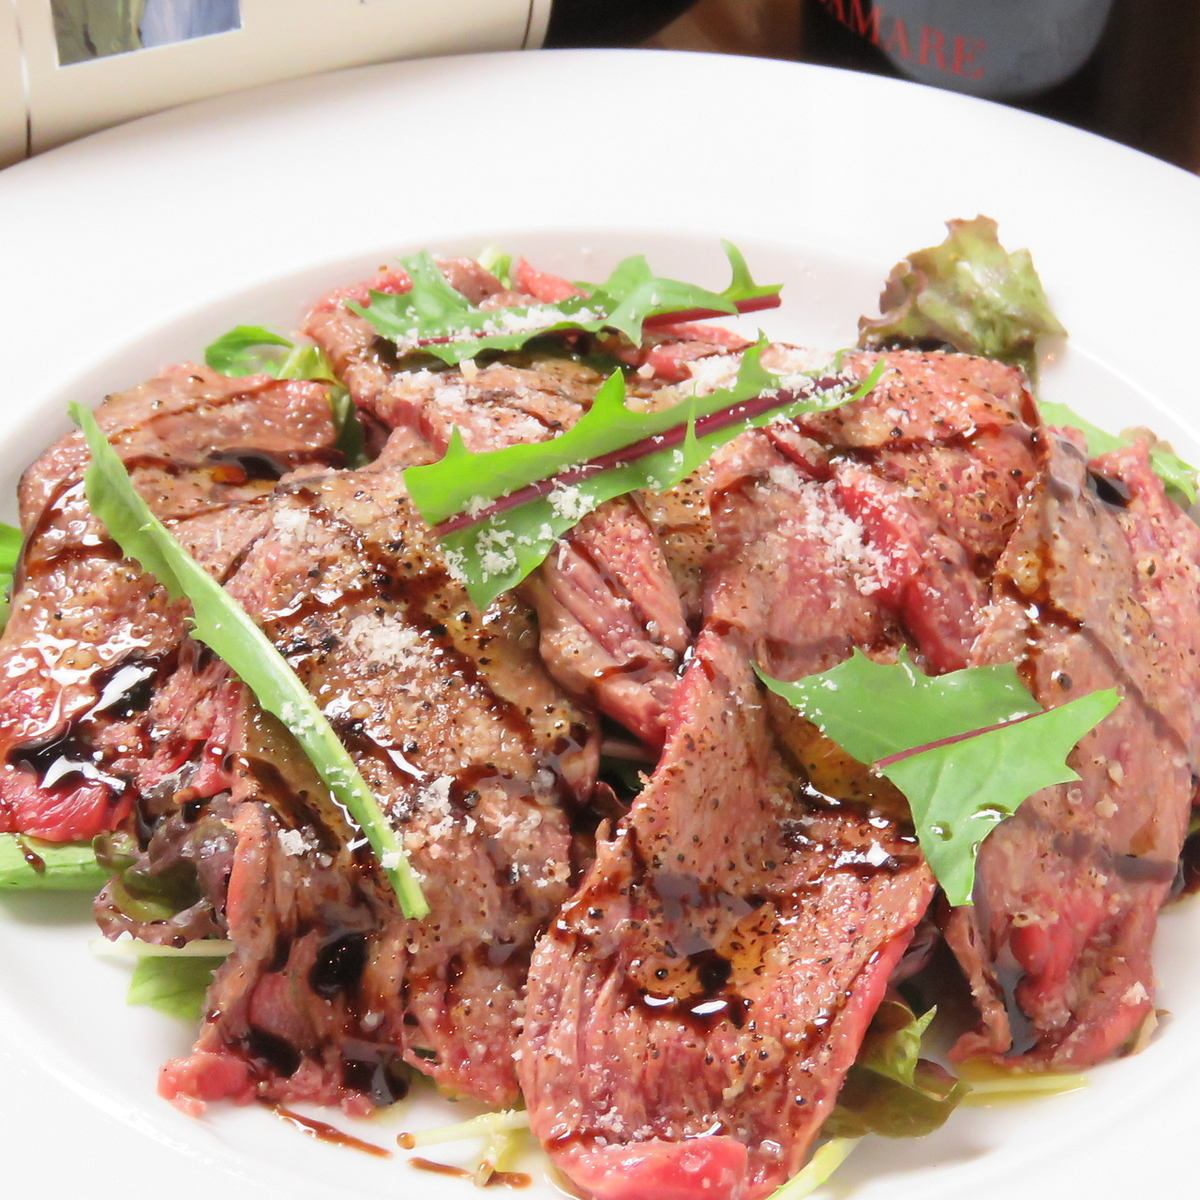 Specialty!Many locally produced dishes including grilled Bizen Kuroge Wagyu beef with parmesan cheese